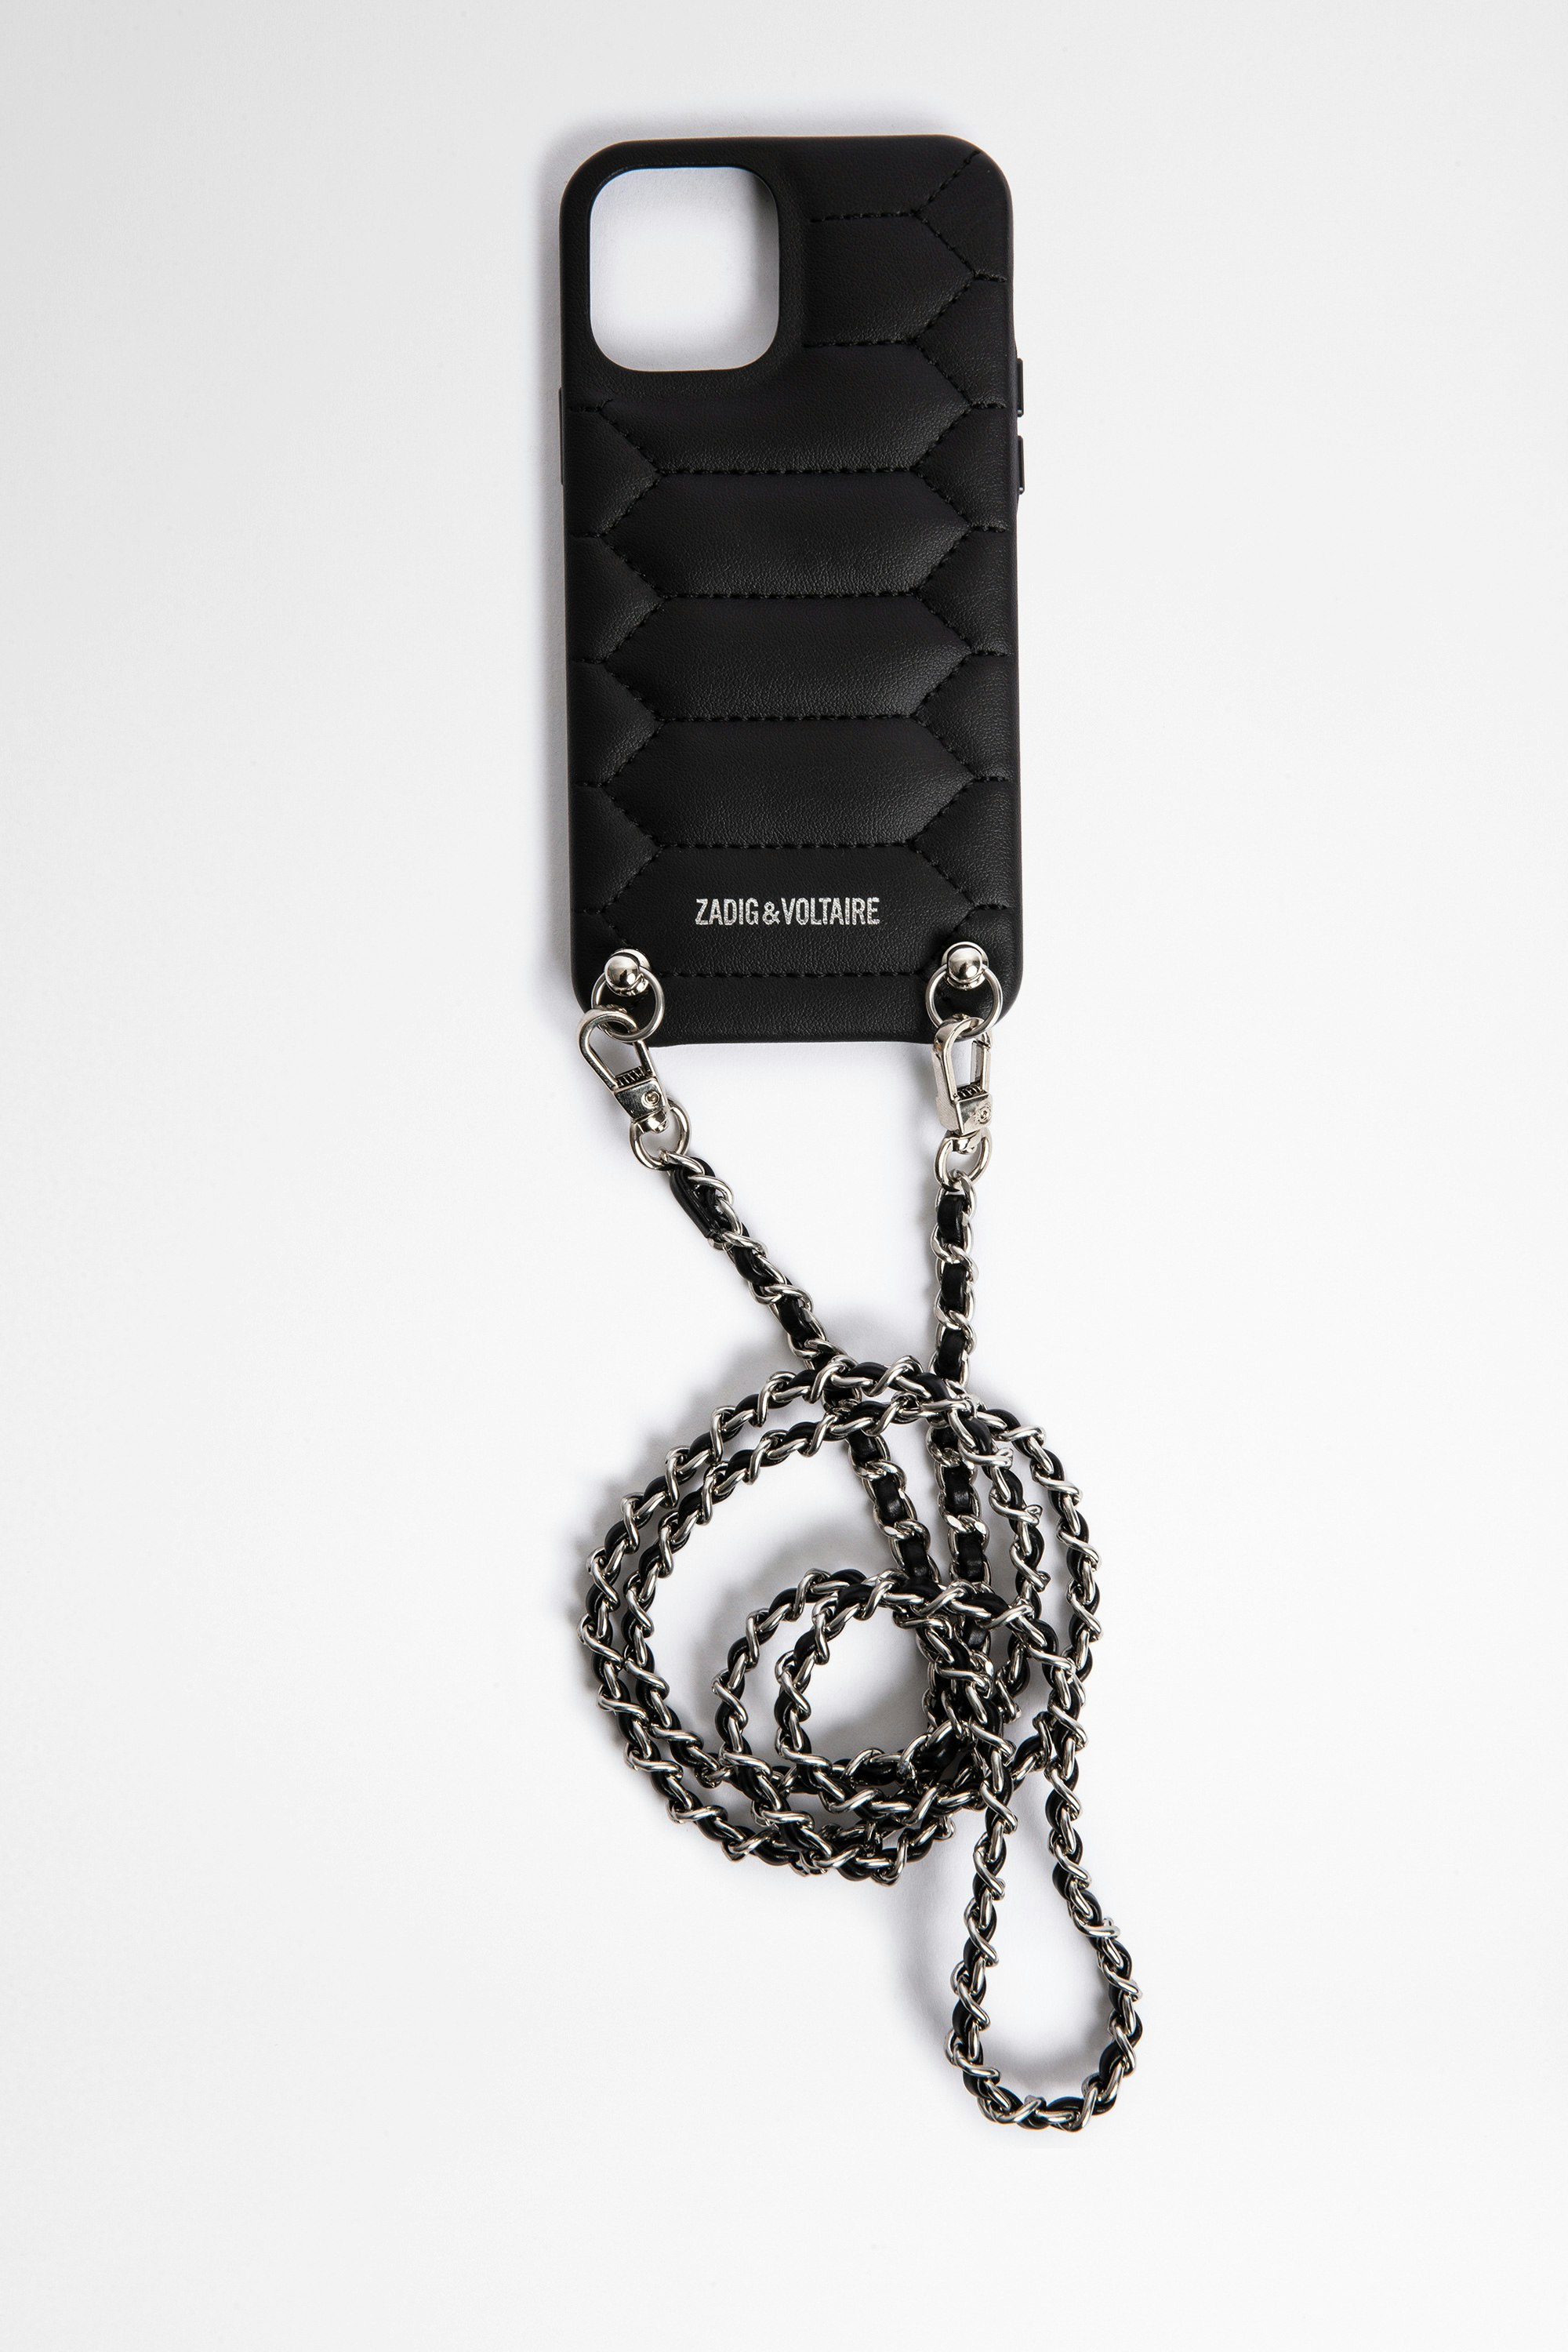 XL Scale iPhone 12 ケース Black leather-effect iPhone 12 case with chain shoulder strap